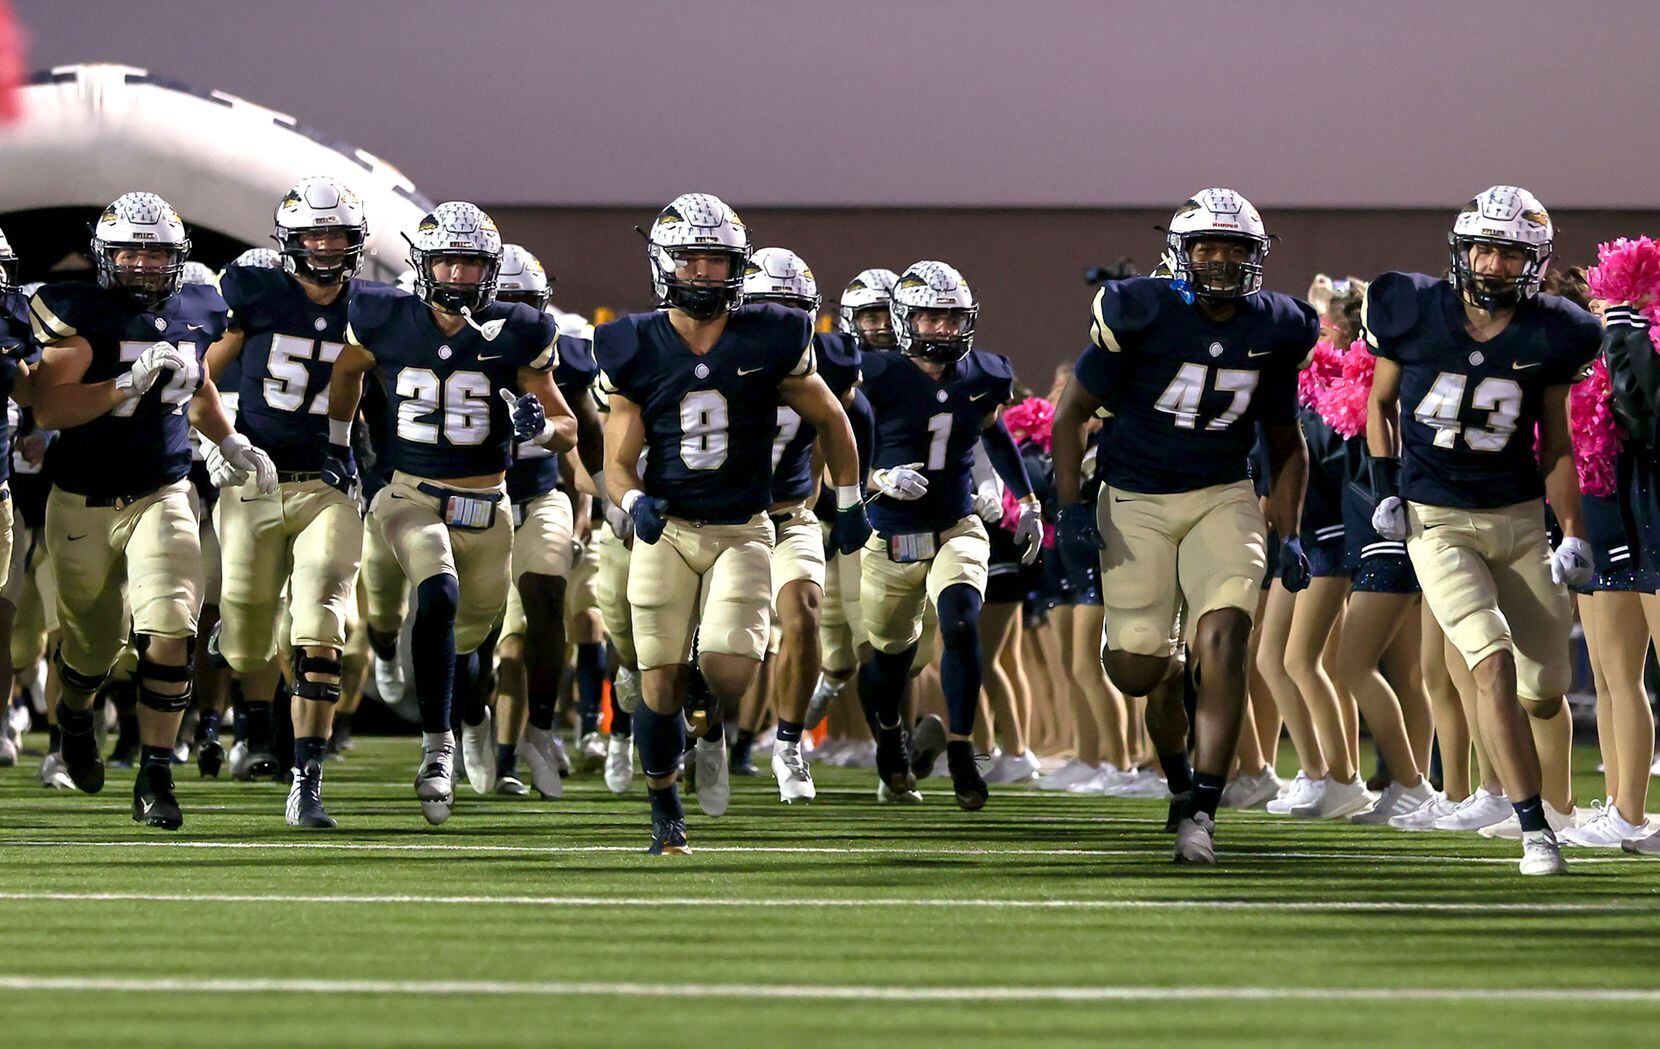 The Keller Indians enter the field to face Byron Nelson in a District 4-6A high school...